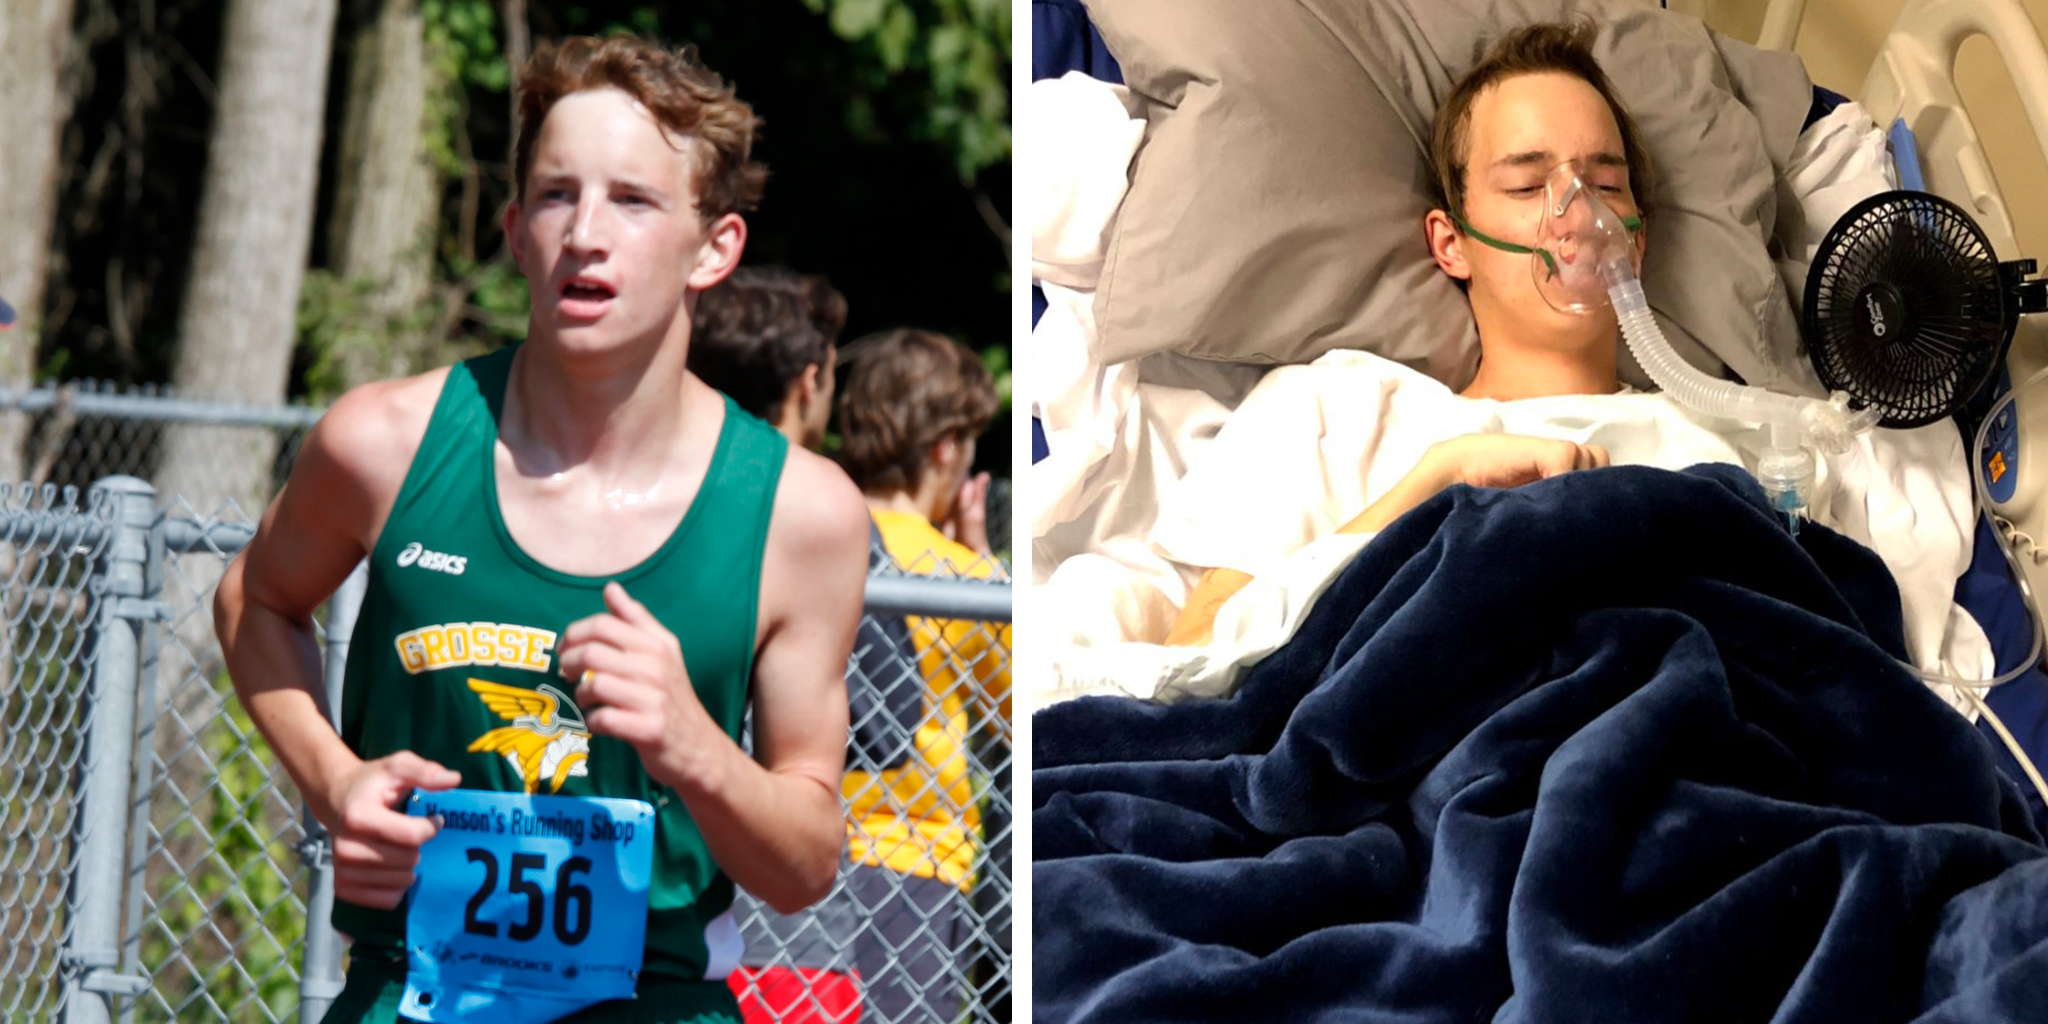 Daniel Ament, before and during his illness. (Photos courtesy of the Ament family)